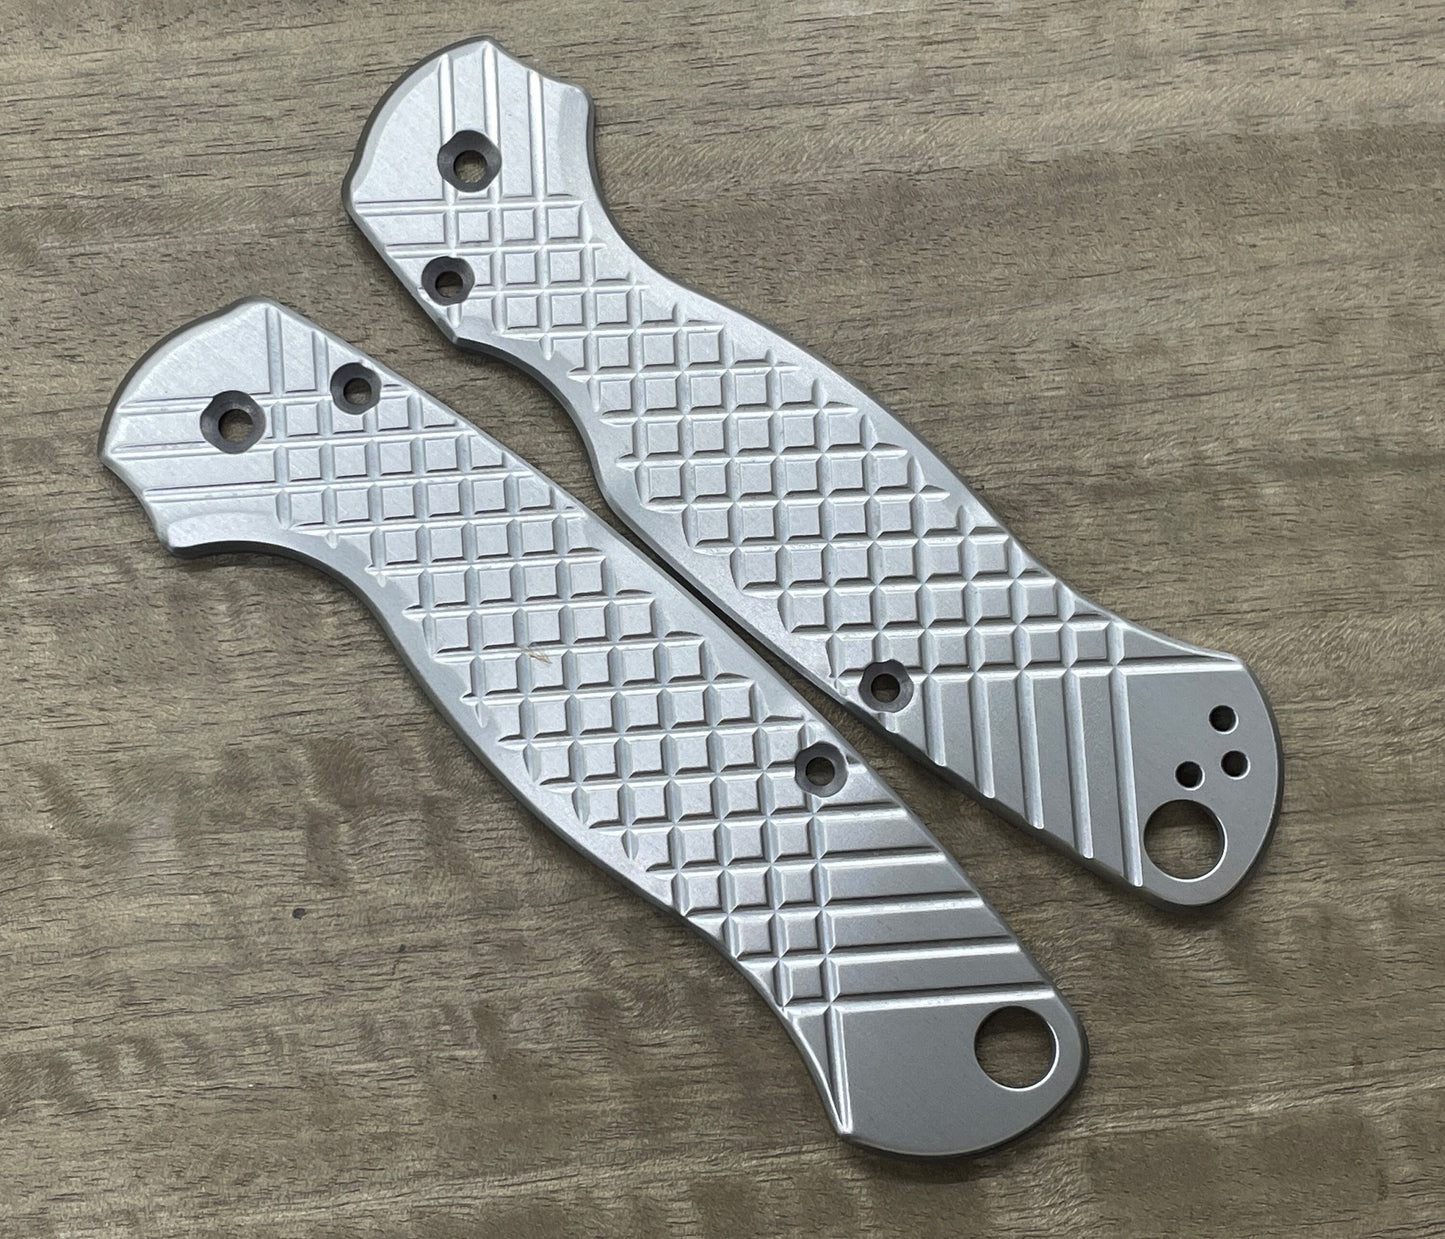 Redesigned FRAG milled Titanium scales for Spyderco Paramilitary 2 PM2